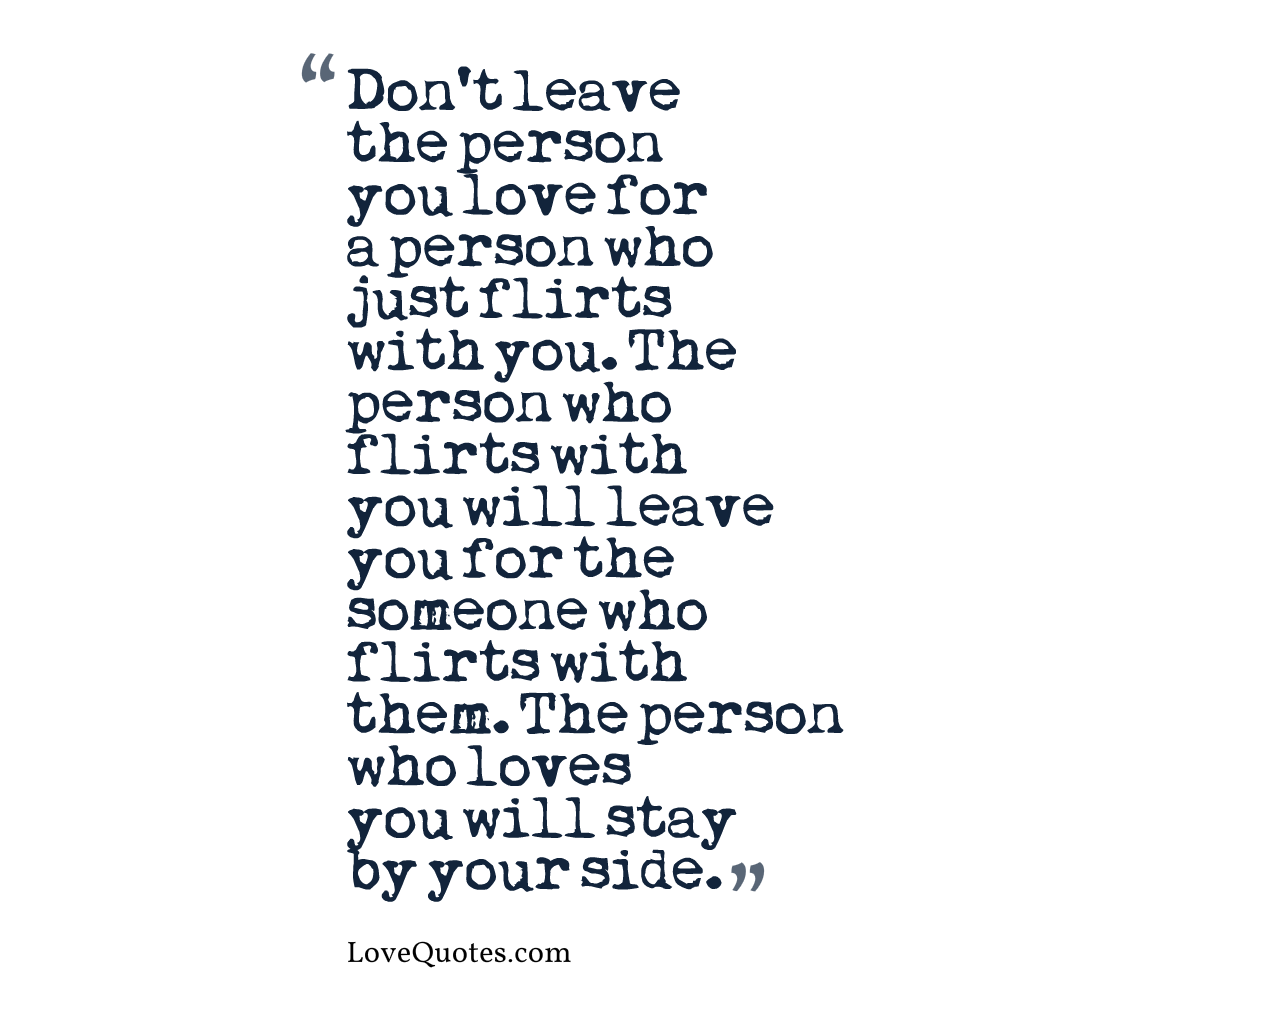 Quotes about someone who left you